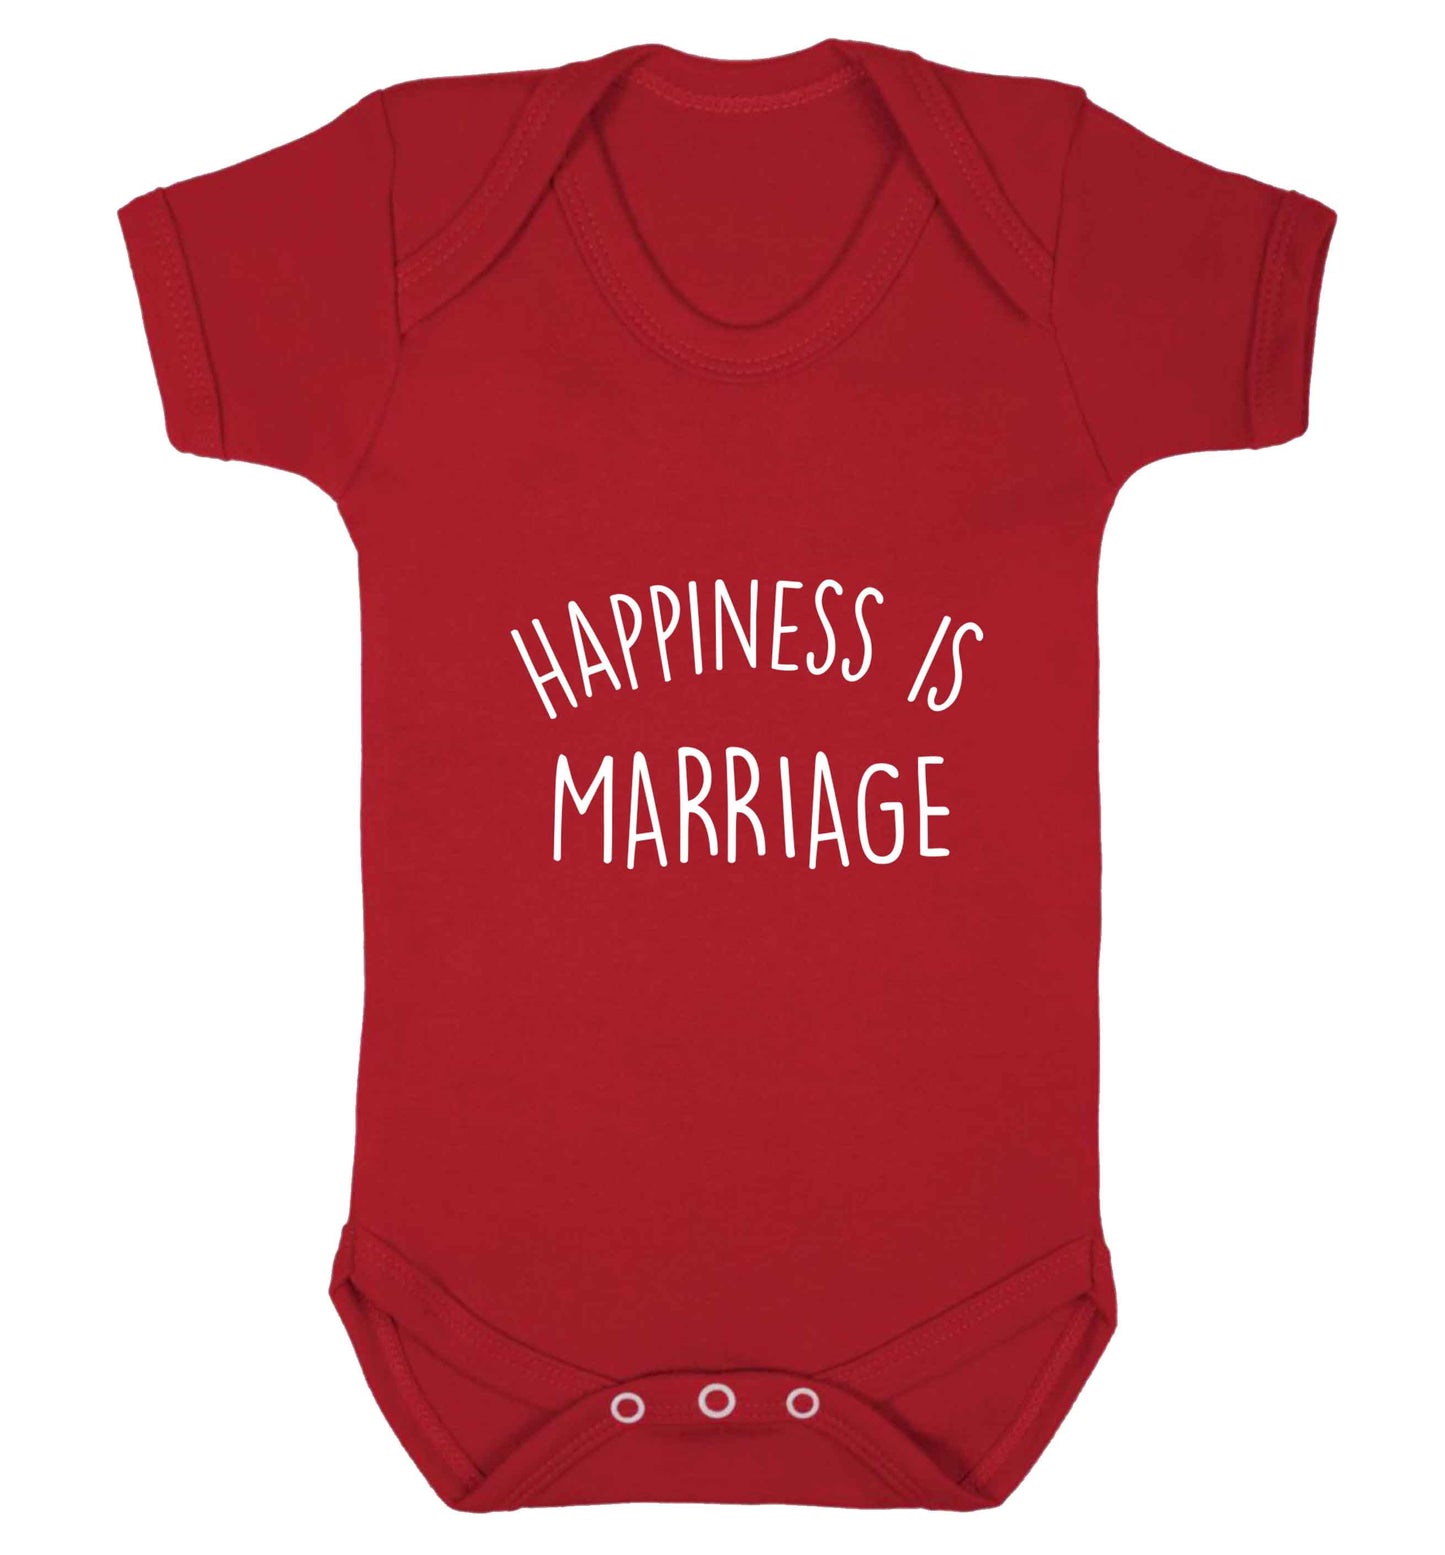 Happiness is marriage baby vest red 18-24 months